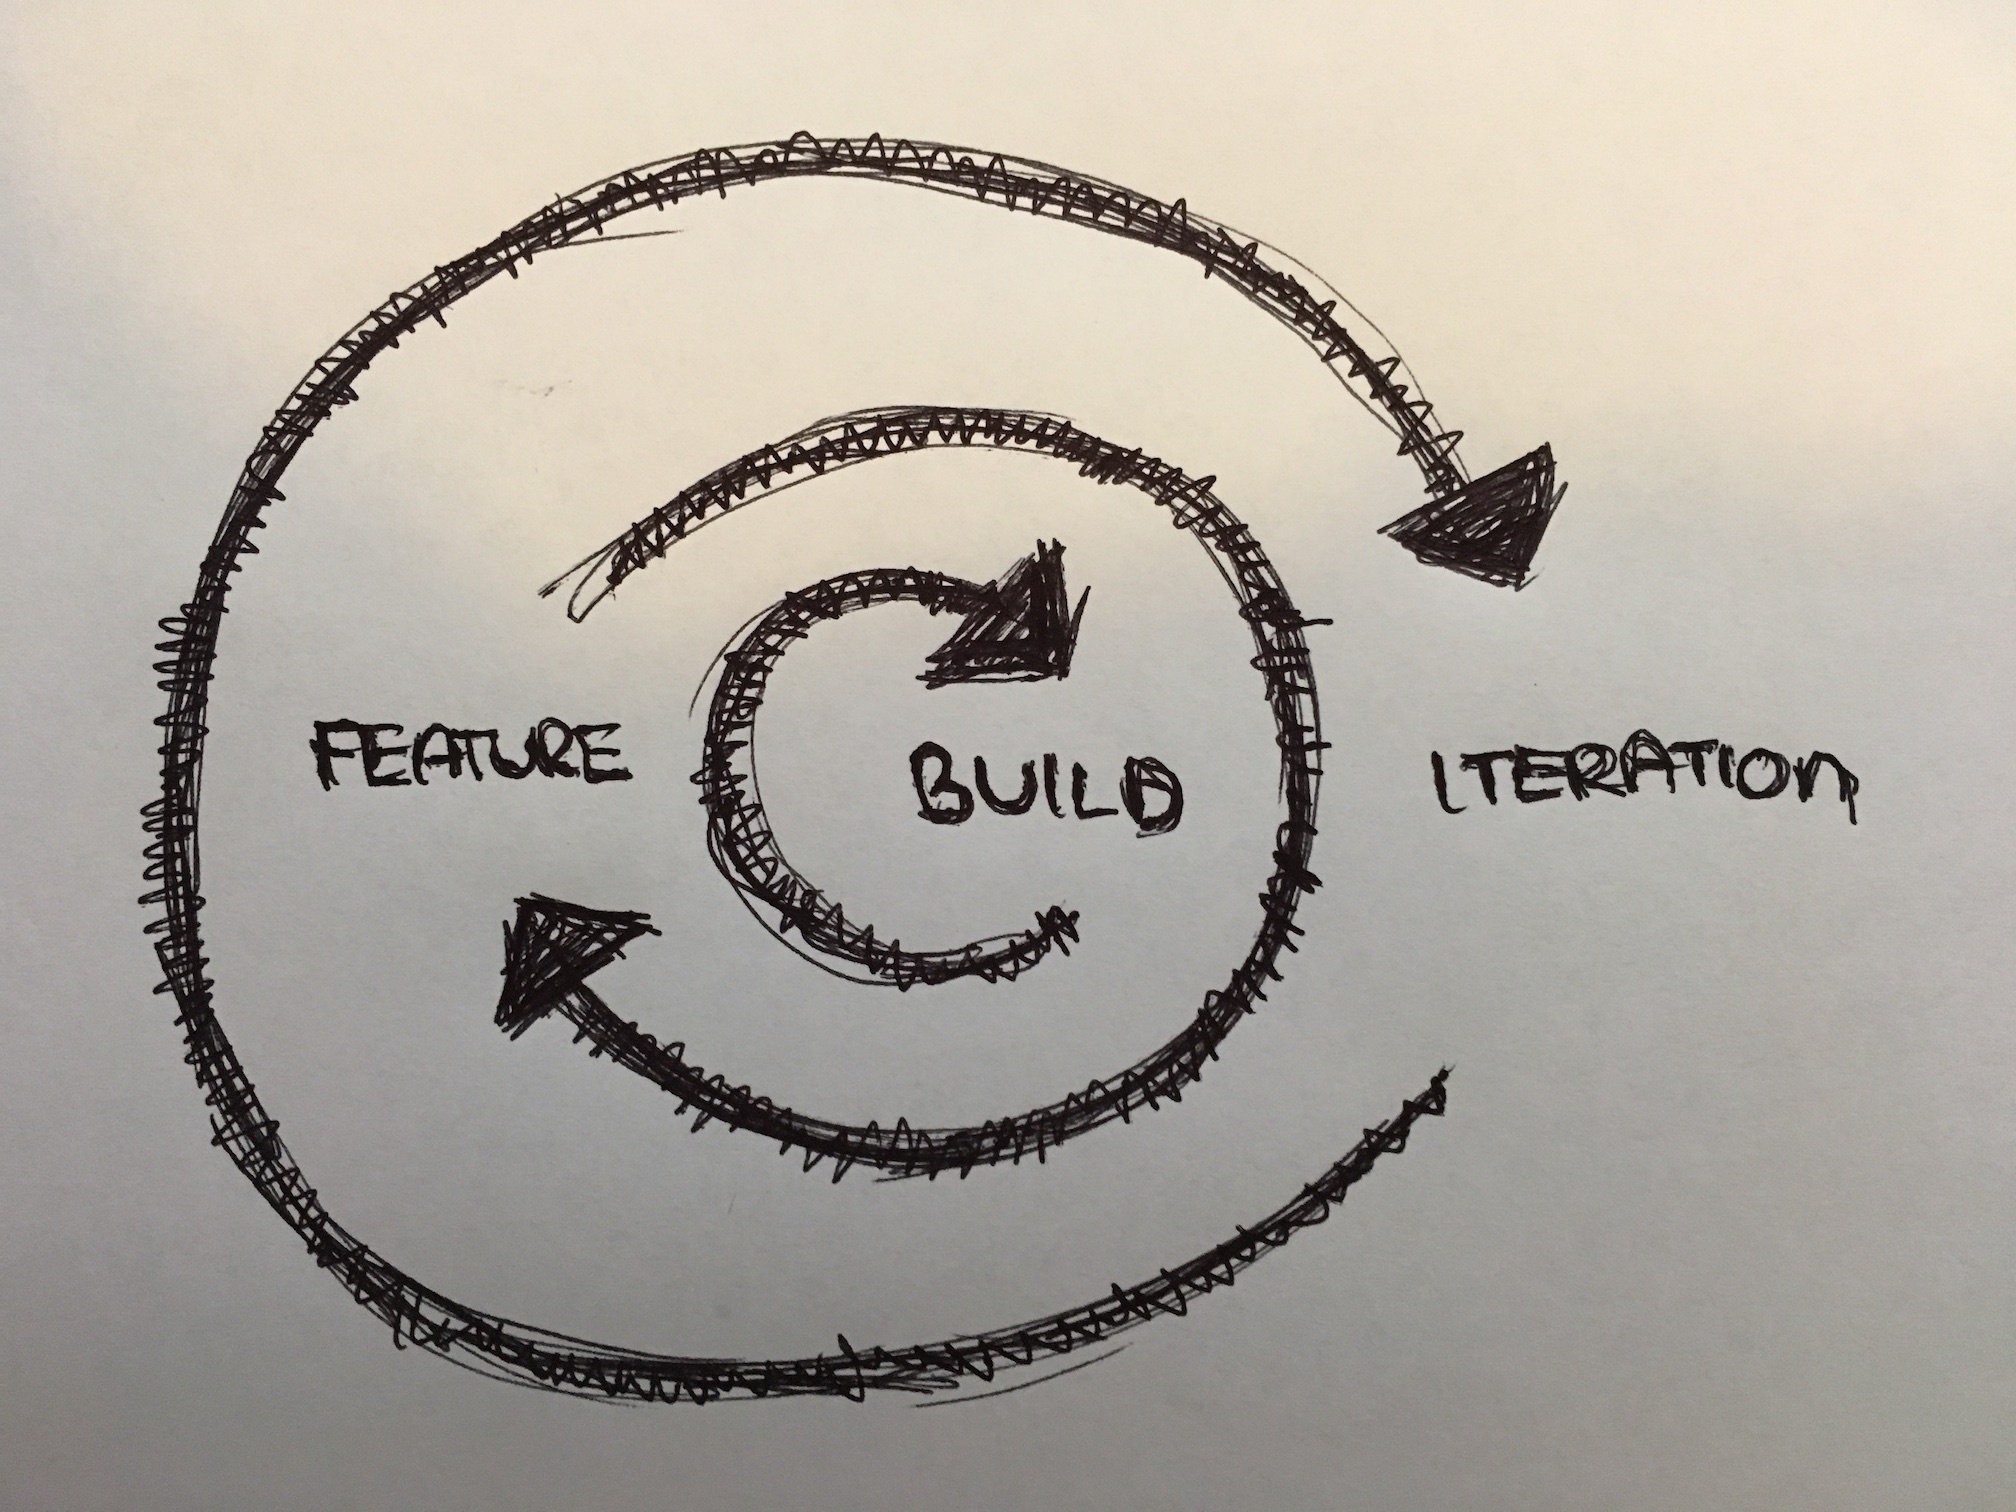 the build, feature, iteration nested loops